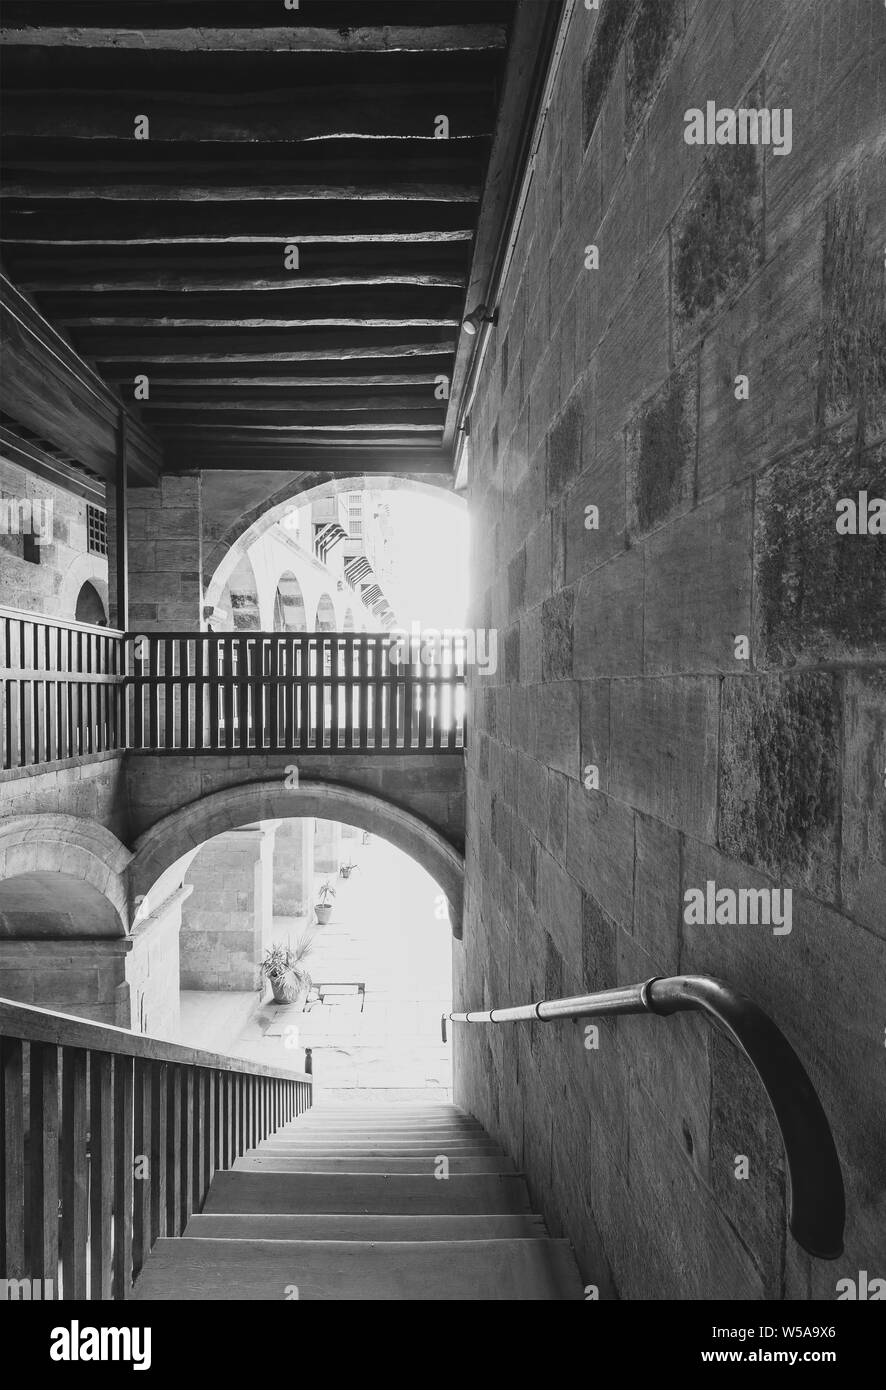 Staircase going down with wooden balustrade at caravansary - Wikala - of Bazaraa, suited in Gamalia district, Medieval Cairo, Egypt Stock Photo